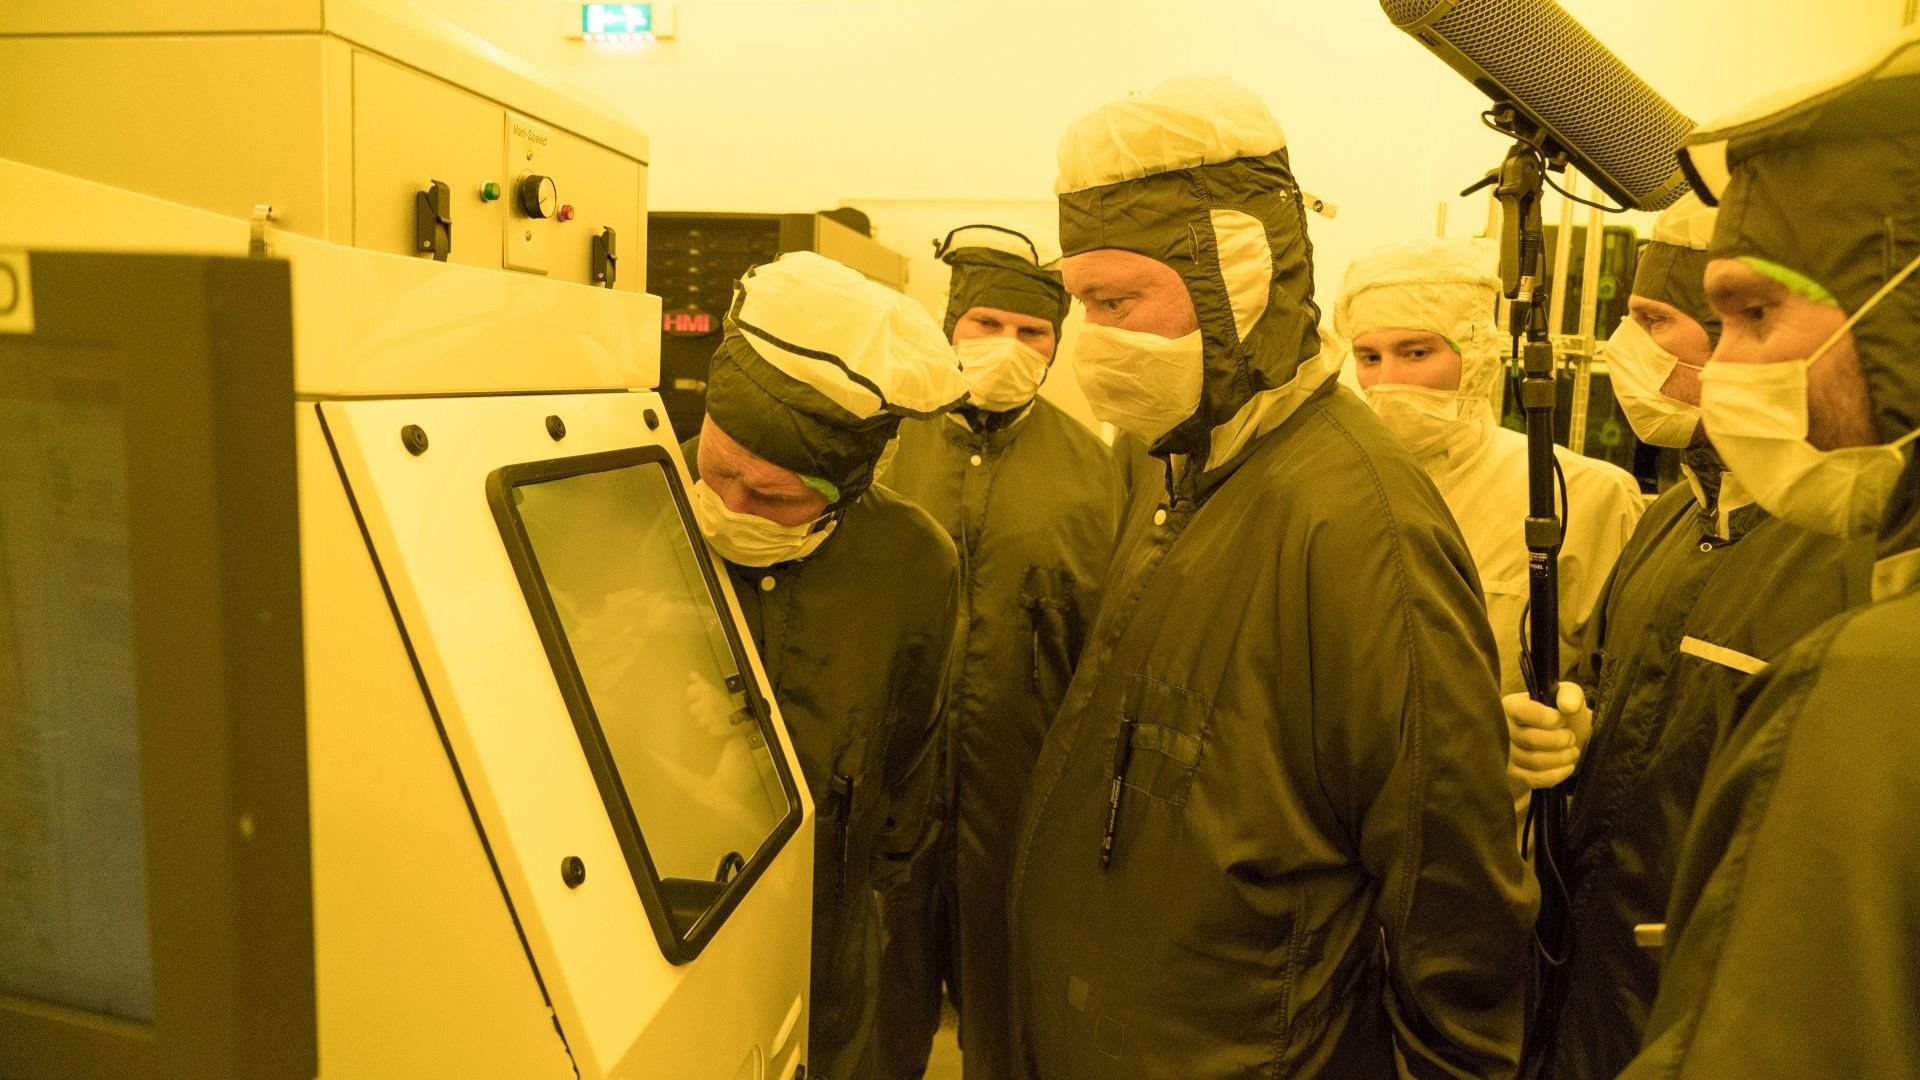 Cleanroom technicians inspect the wafer containing the Guiness World Record-holding smallest advertisement at ASML in Veldhoven, the Netherlands.